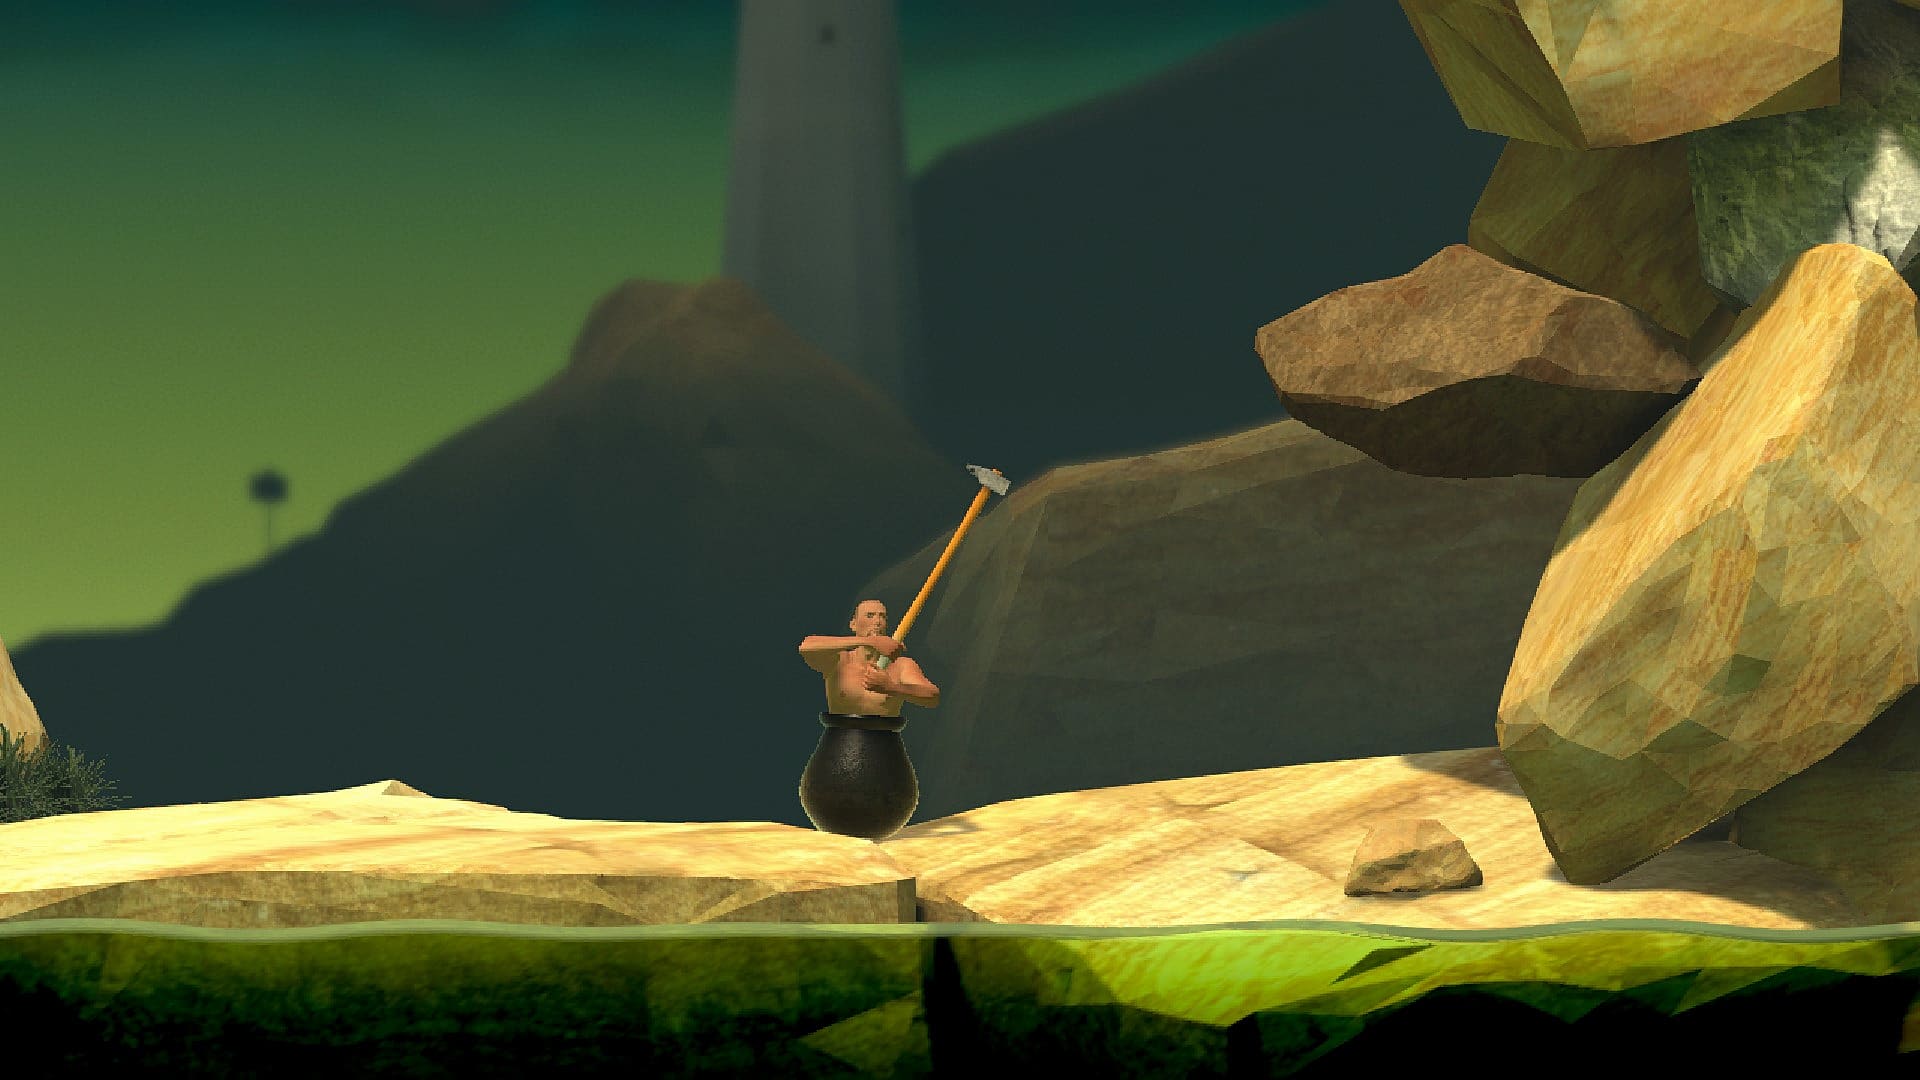 getting over it with bennett foddy end